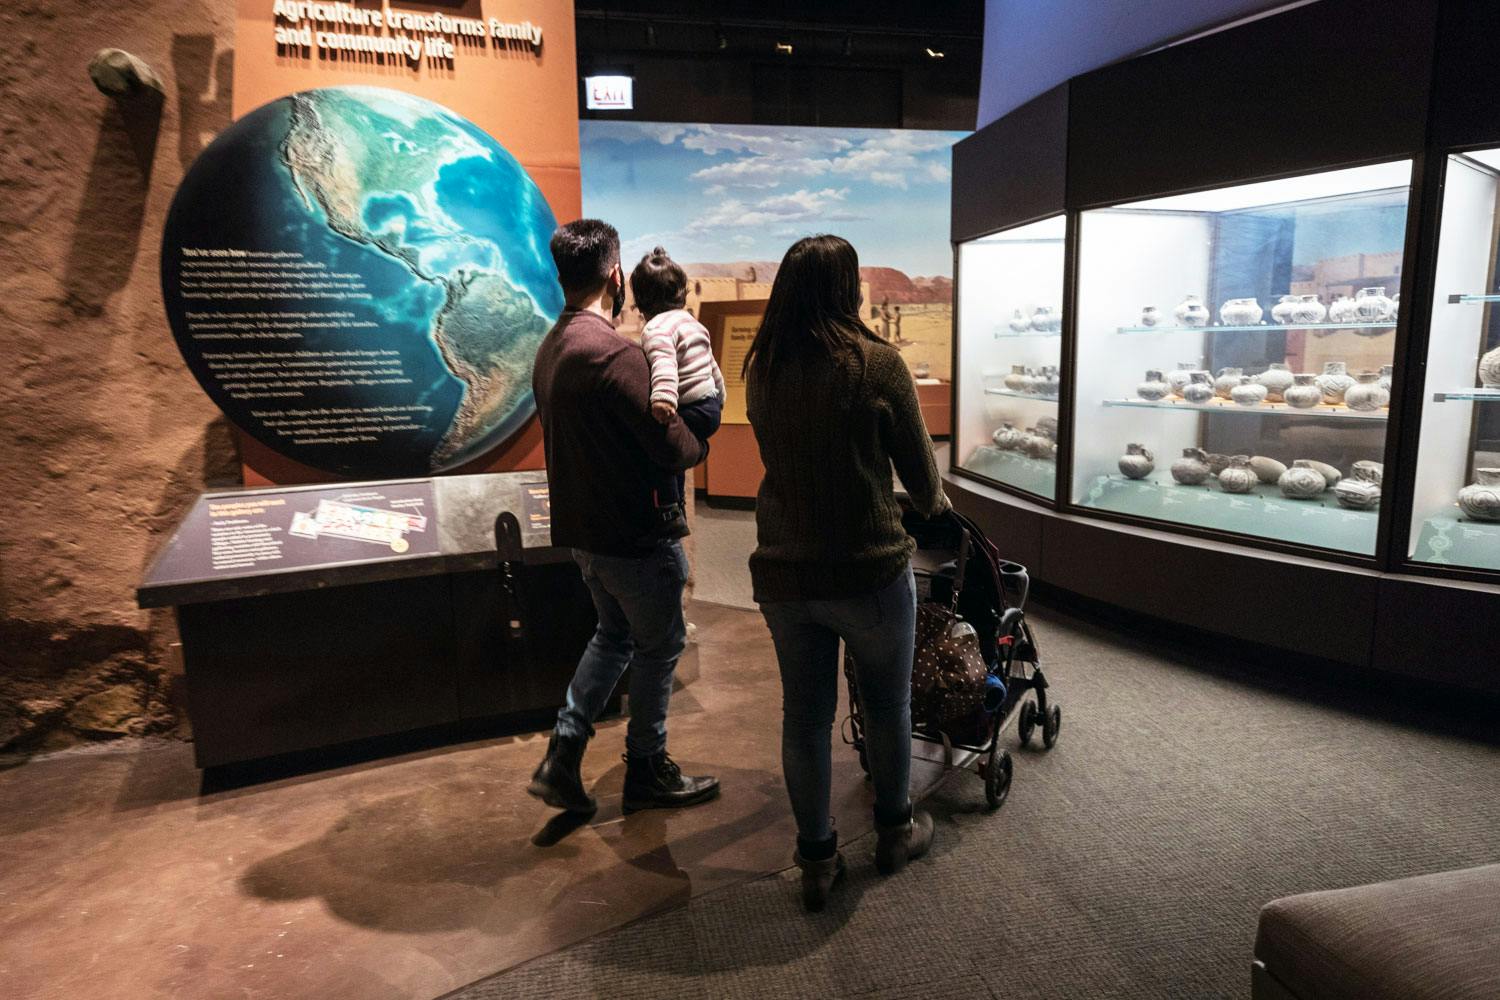 Two adults and a small child walk through the Ancient Americas exhibition. A map of the globe is on the wall to the left, and many pots are in a display case to the right.